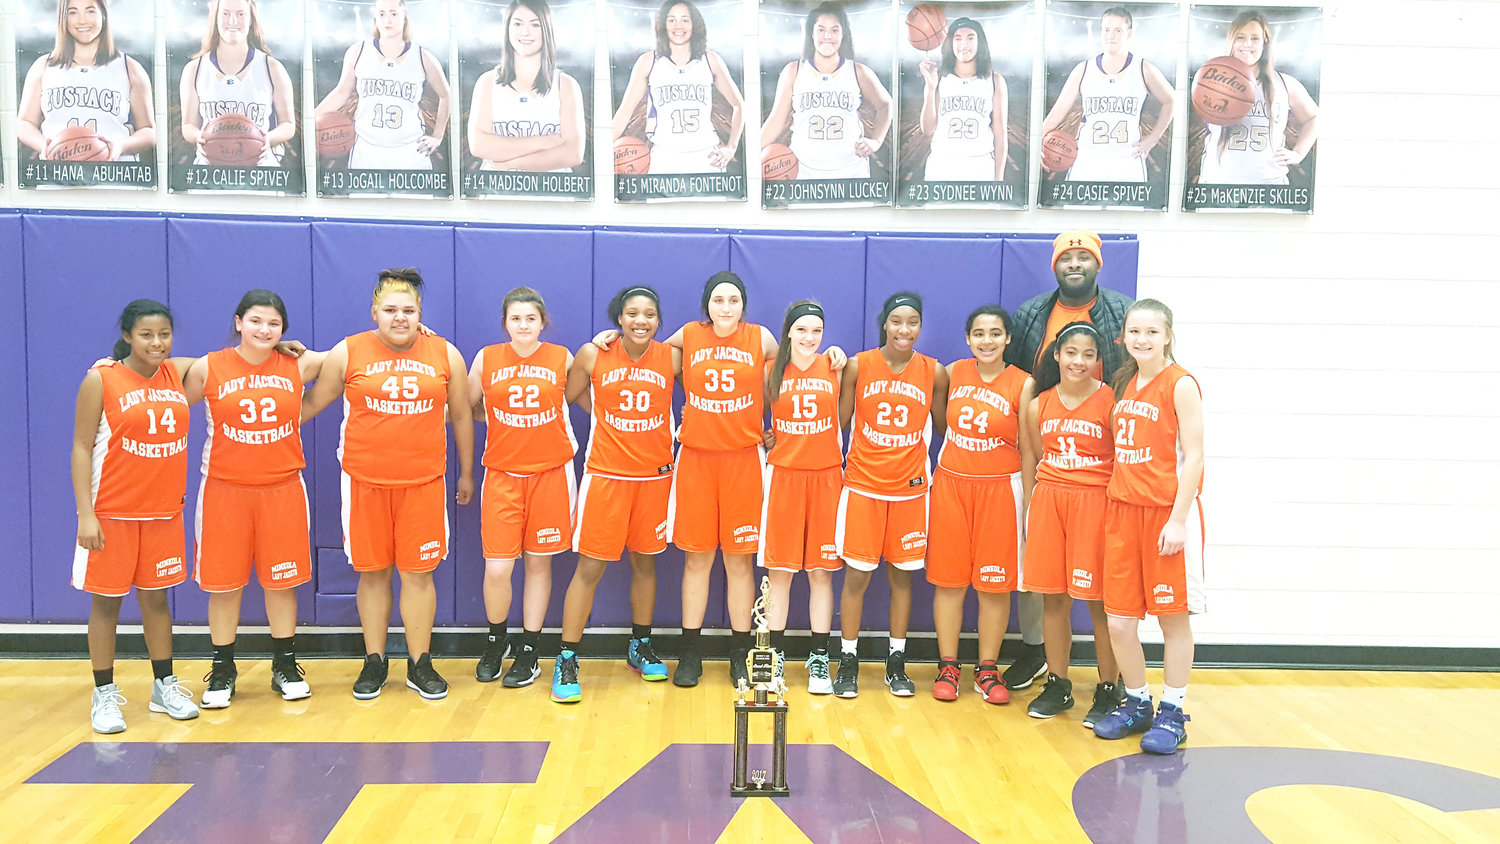 Mineola Middle School Girls’ Basketball competed in the District Tournament in Eustace on Jan. 28. The eighth grade girls finished second overall.  Seventh grade girls finished third overall. The MMS girls basketball team members are, from left, Leonica Villeda, Erica Marquez, Gabriella Ortiz, Alexia Love, Alyssa Fielder, Brittany Pickle, Caidyn Anderson, Tahjae Black, Catherine Mclemore, Jaiden Gardner, Emily Wiley and Coach Ed Hawkins. (Photo courtesy Gene’s Photgraphy)